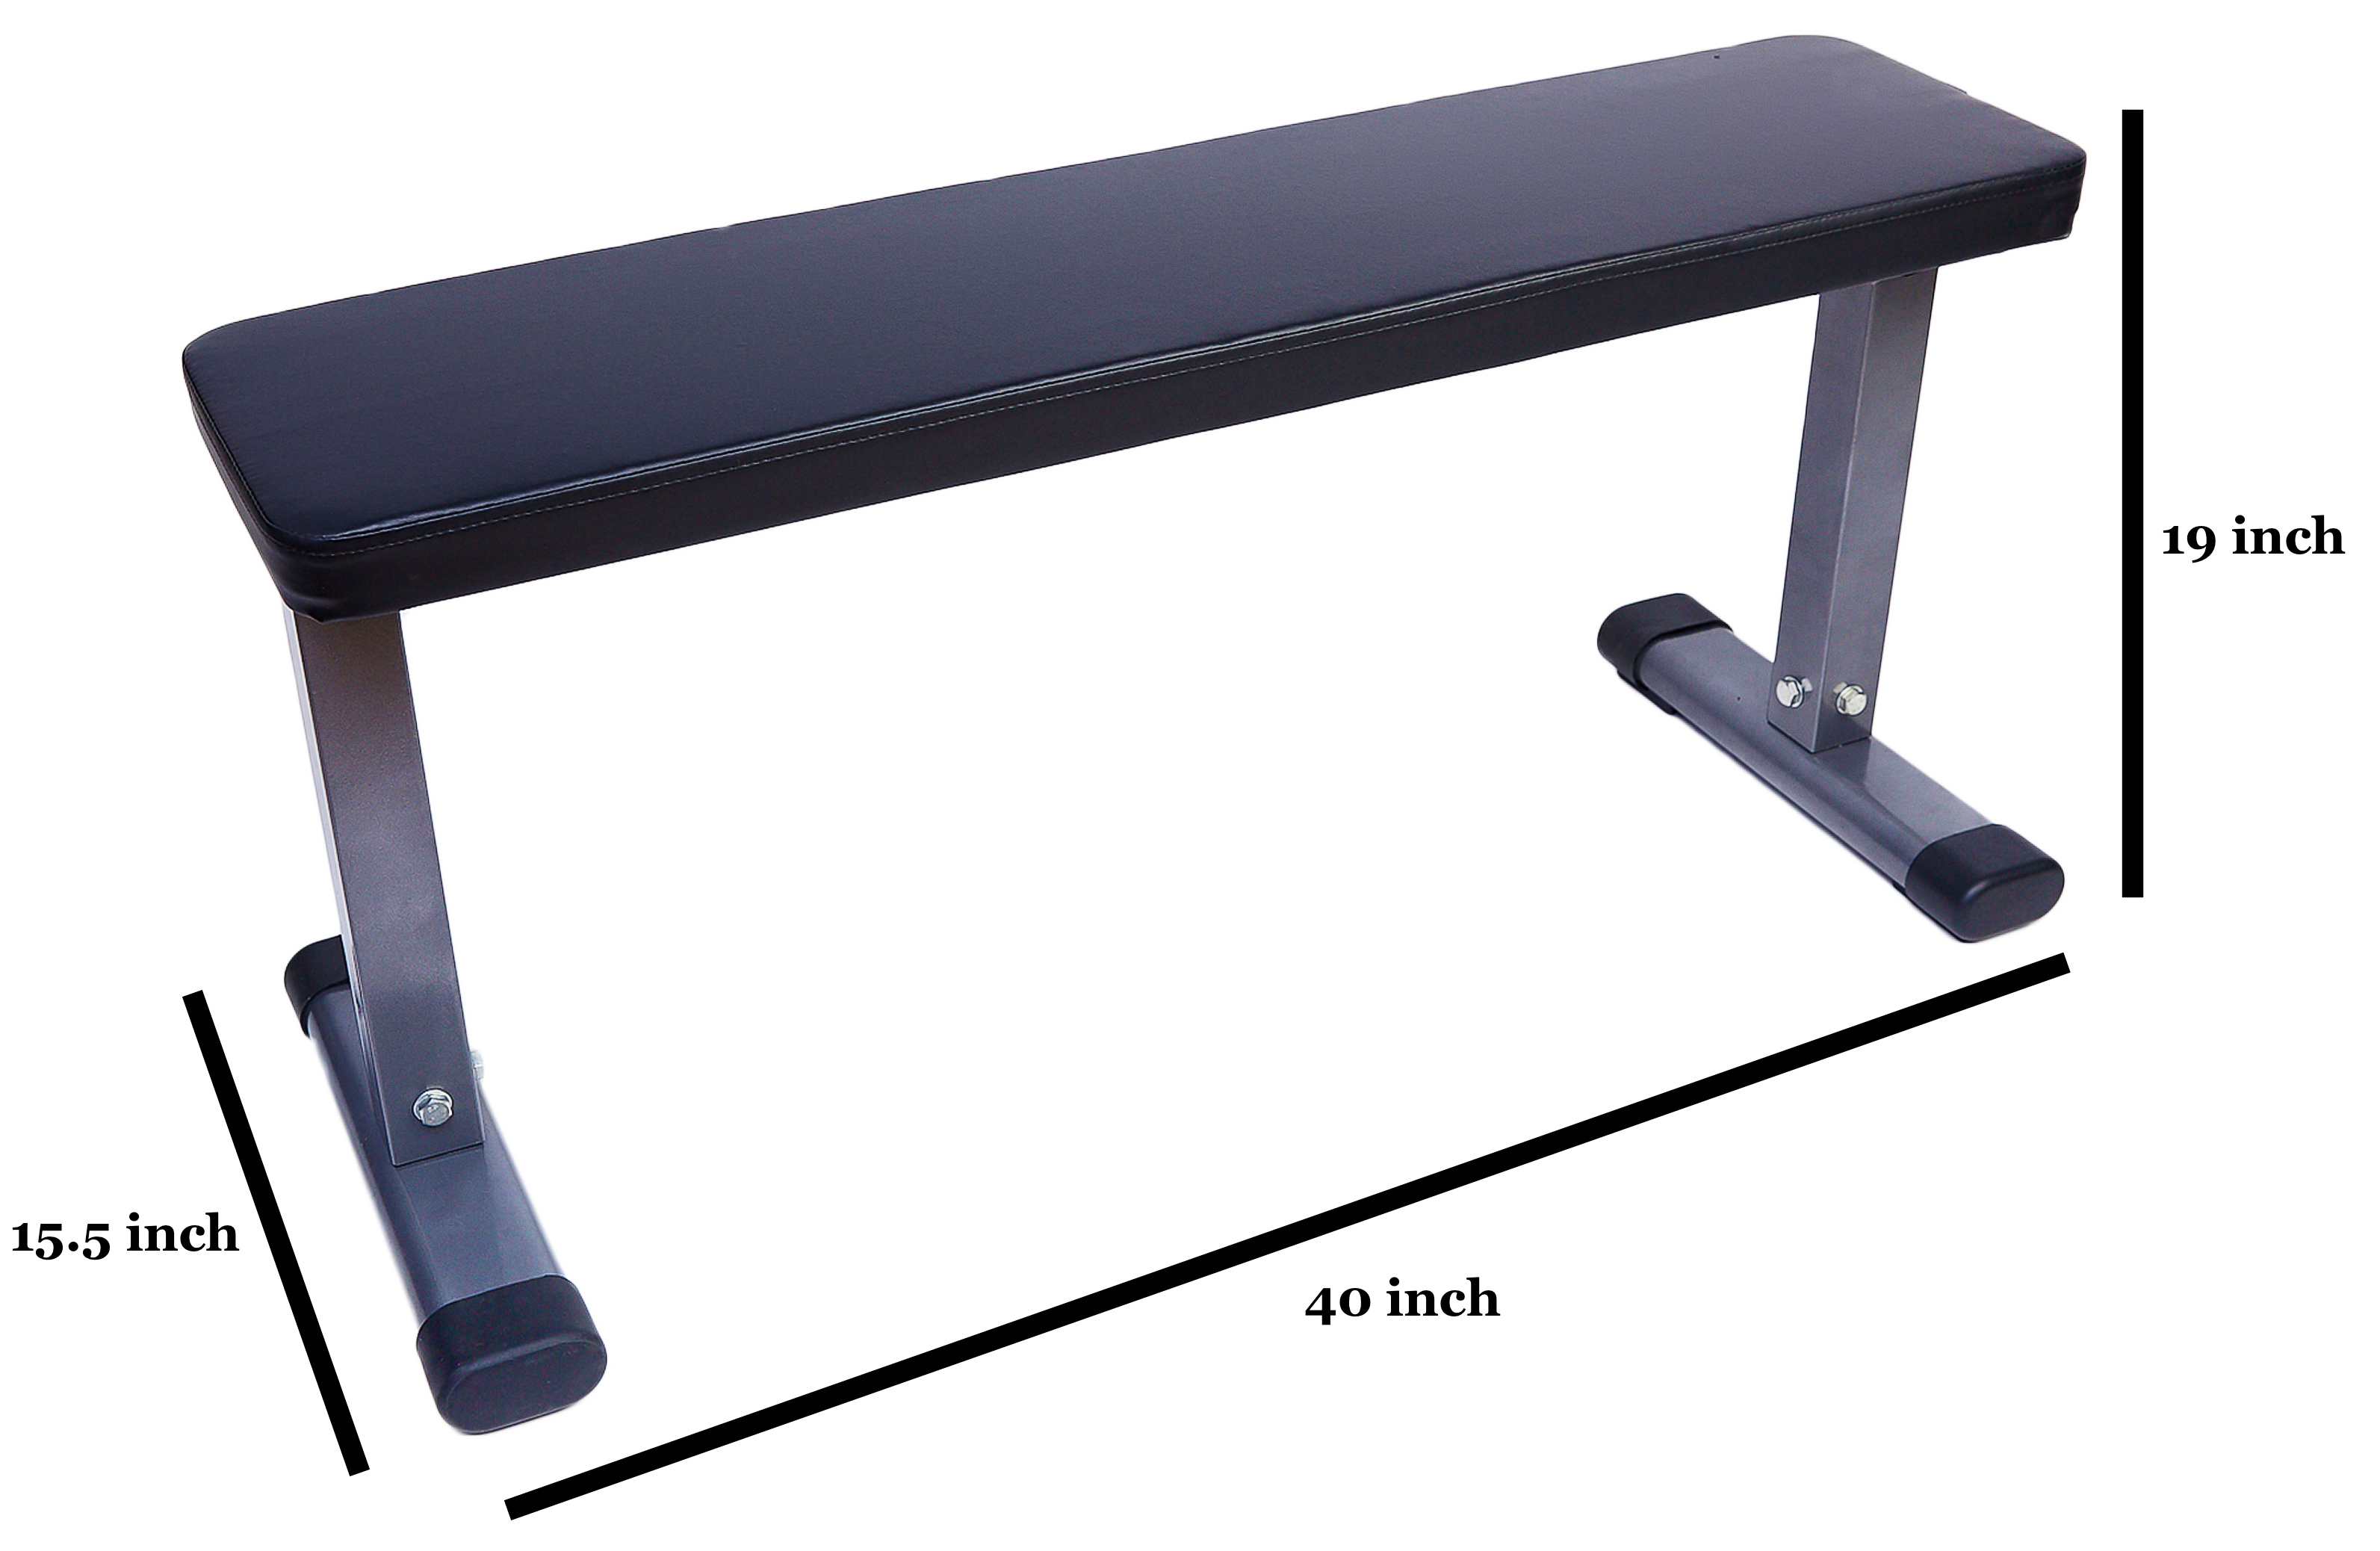 BalanceFrom Heavy Duty Adjustable and Foldable Utility Weight Bench, Flat, 600-Pound Capacity - image 3 of 6